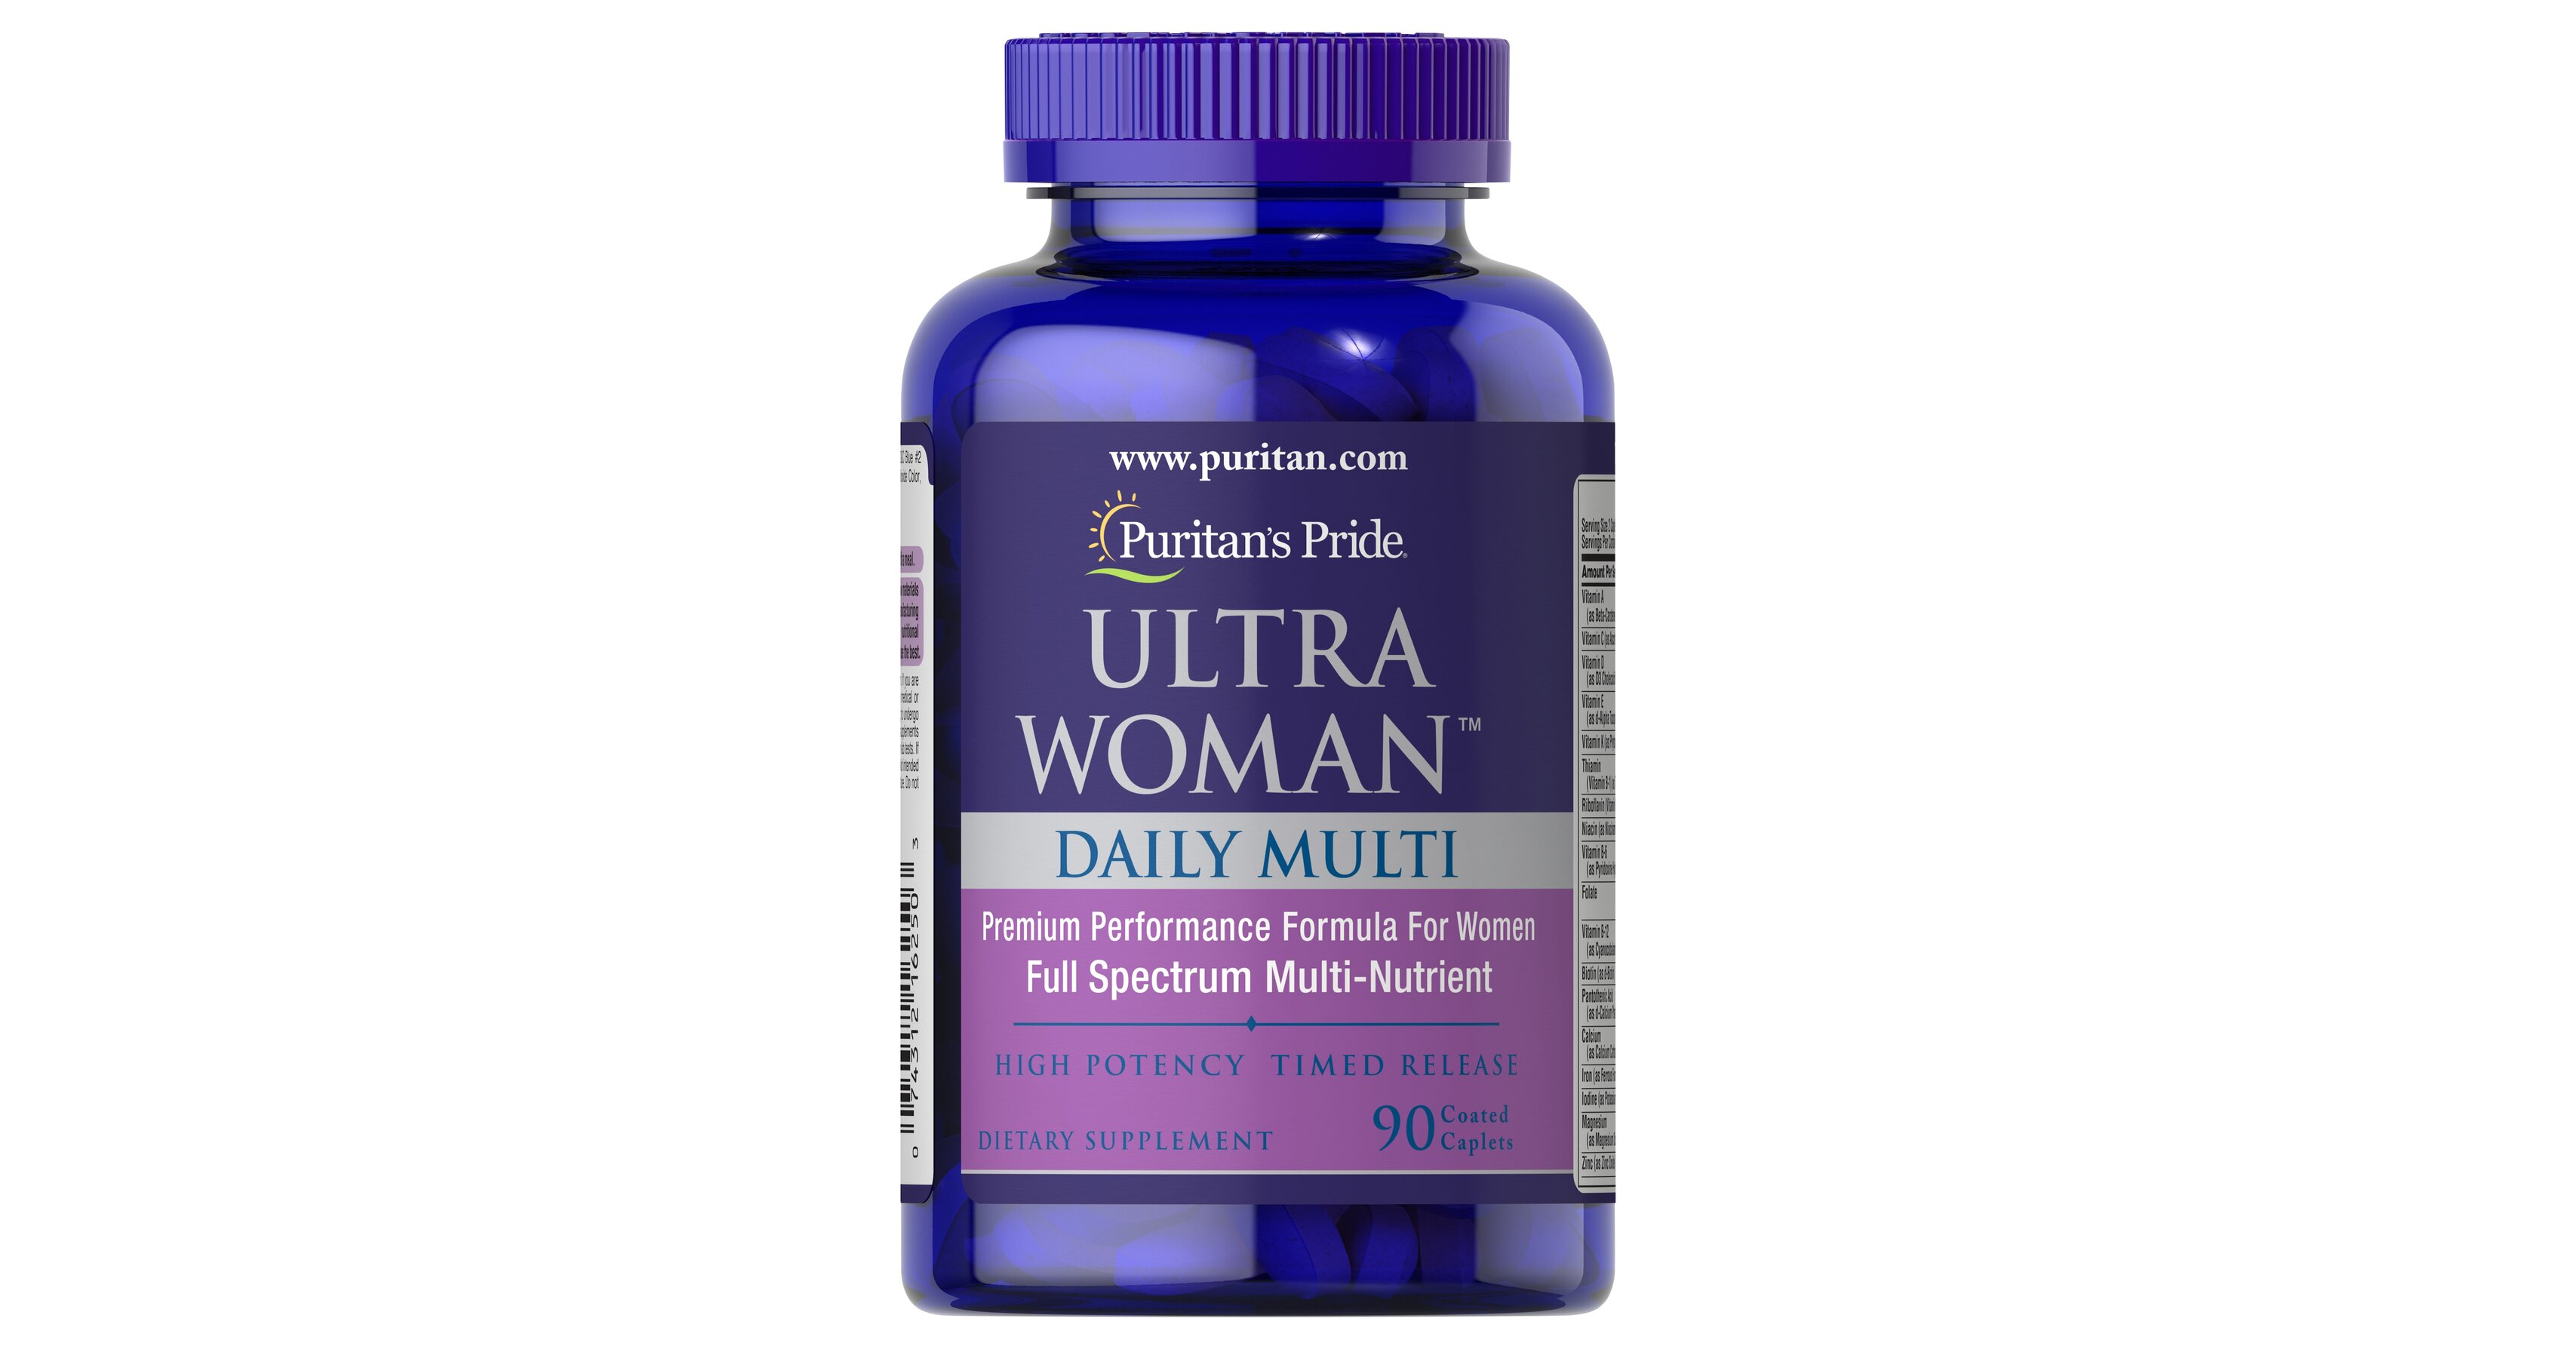 Puritan's Pride Ultra Woman™ Daily Multi Timed Release, 90 Caplets item #6250